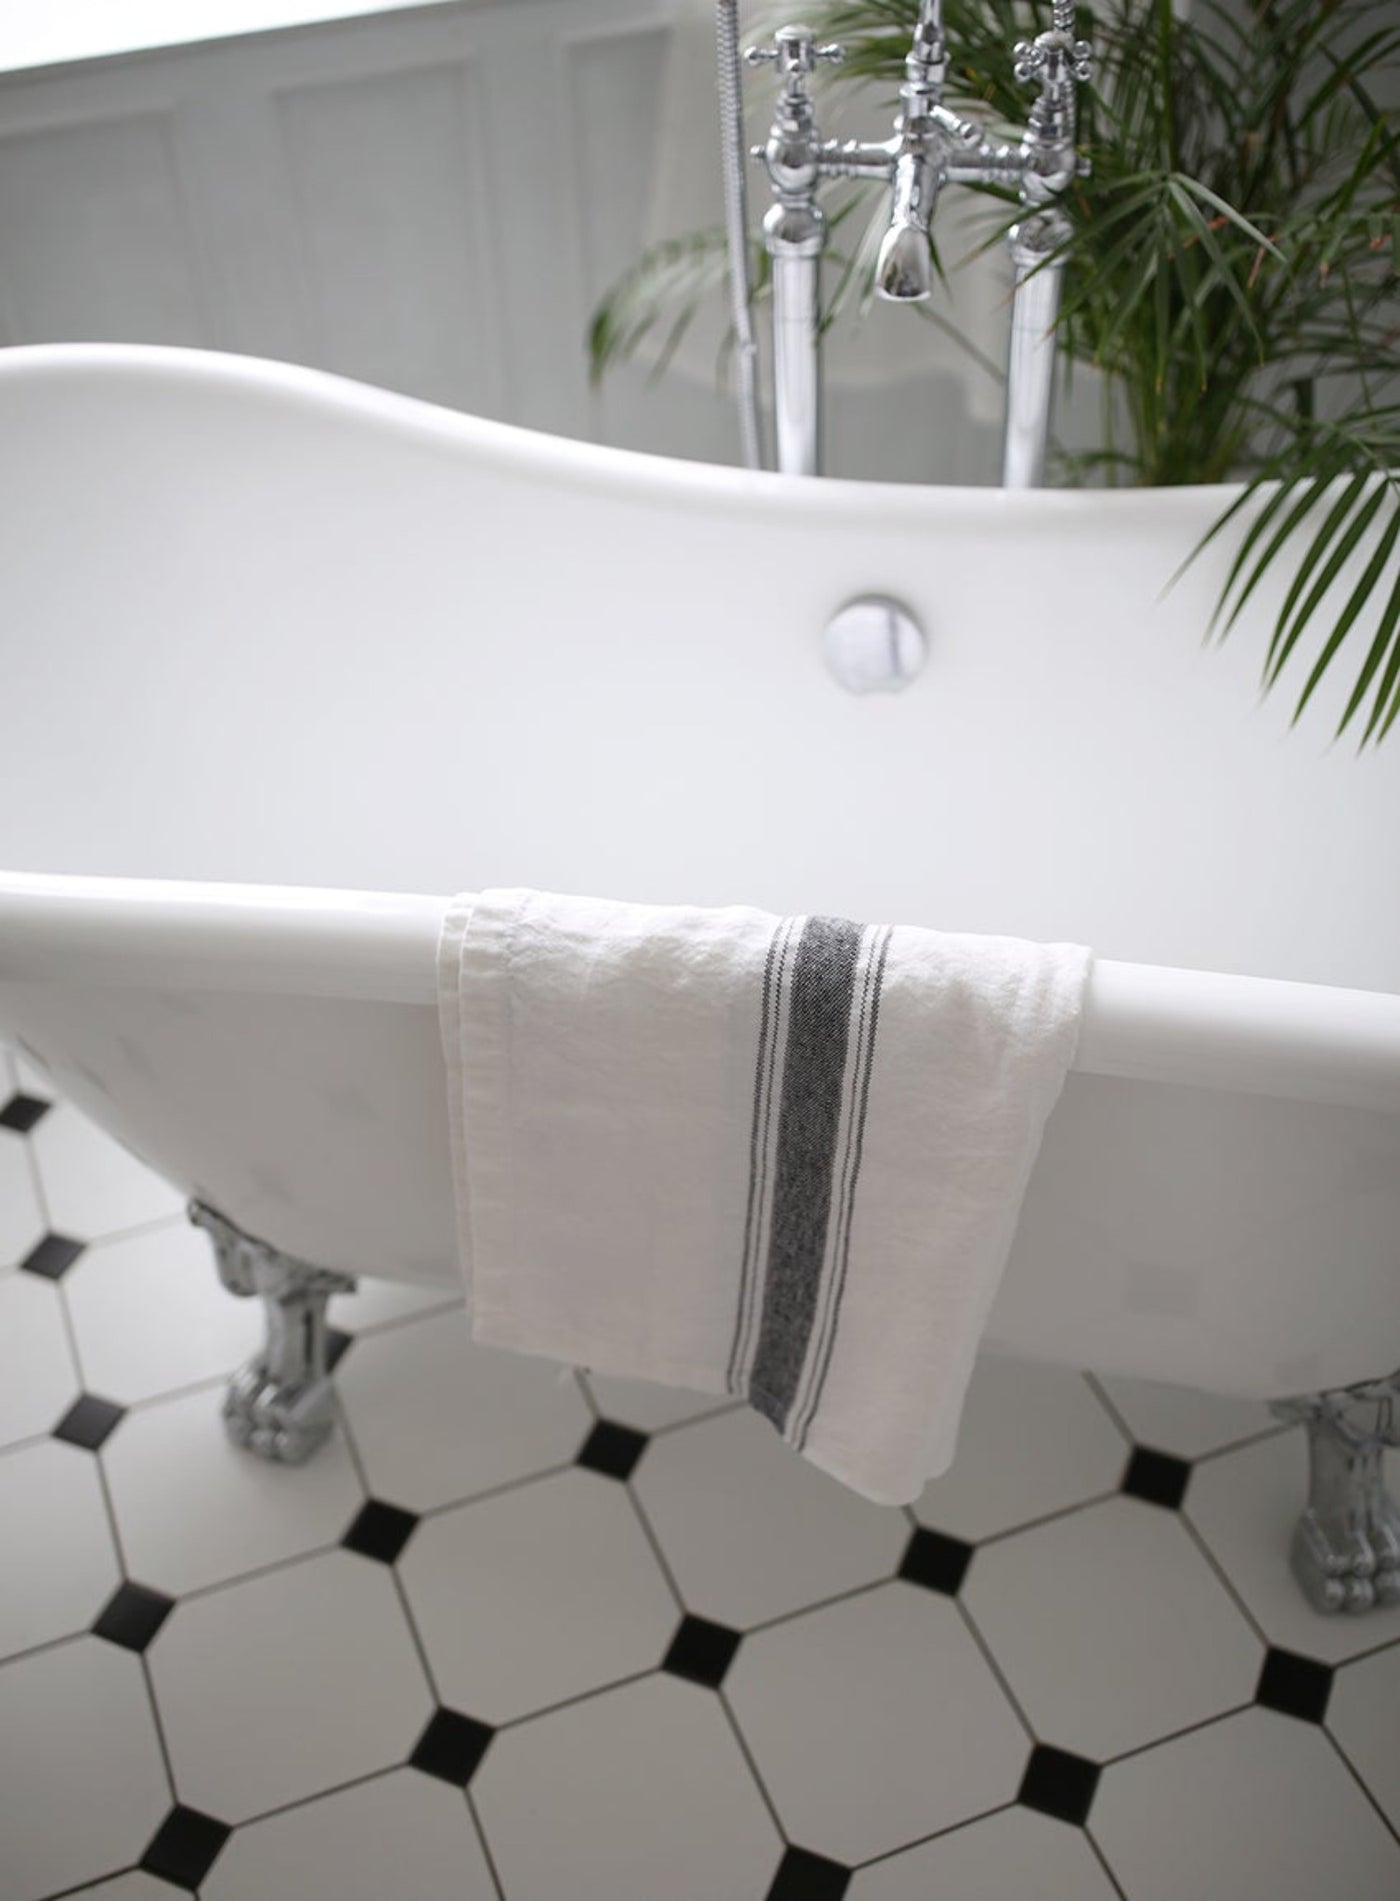 Linen Guest Towel: White with charcoal grey farmhouse stripes, over side of bathtub. SKU: TT.CS.28WC